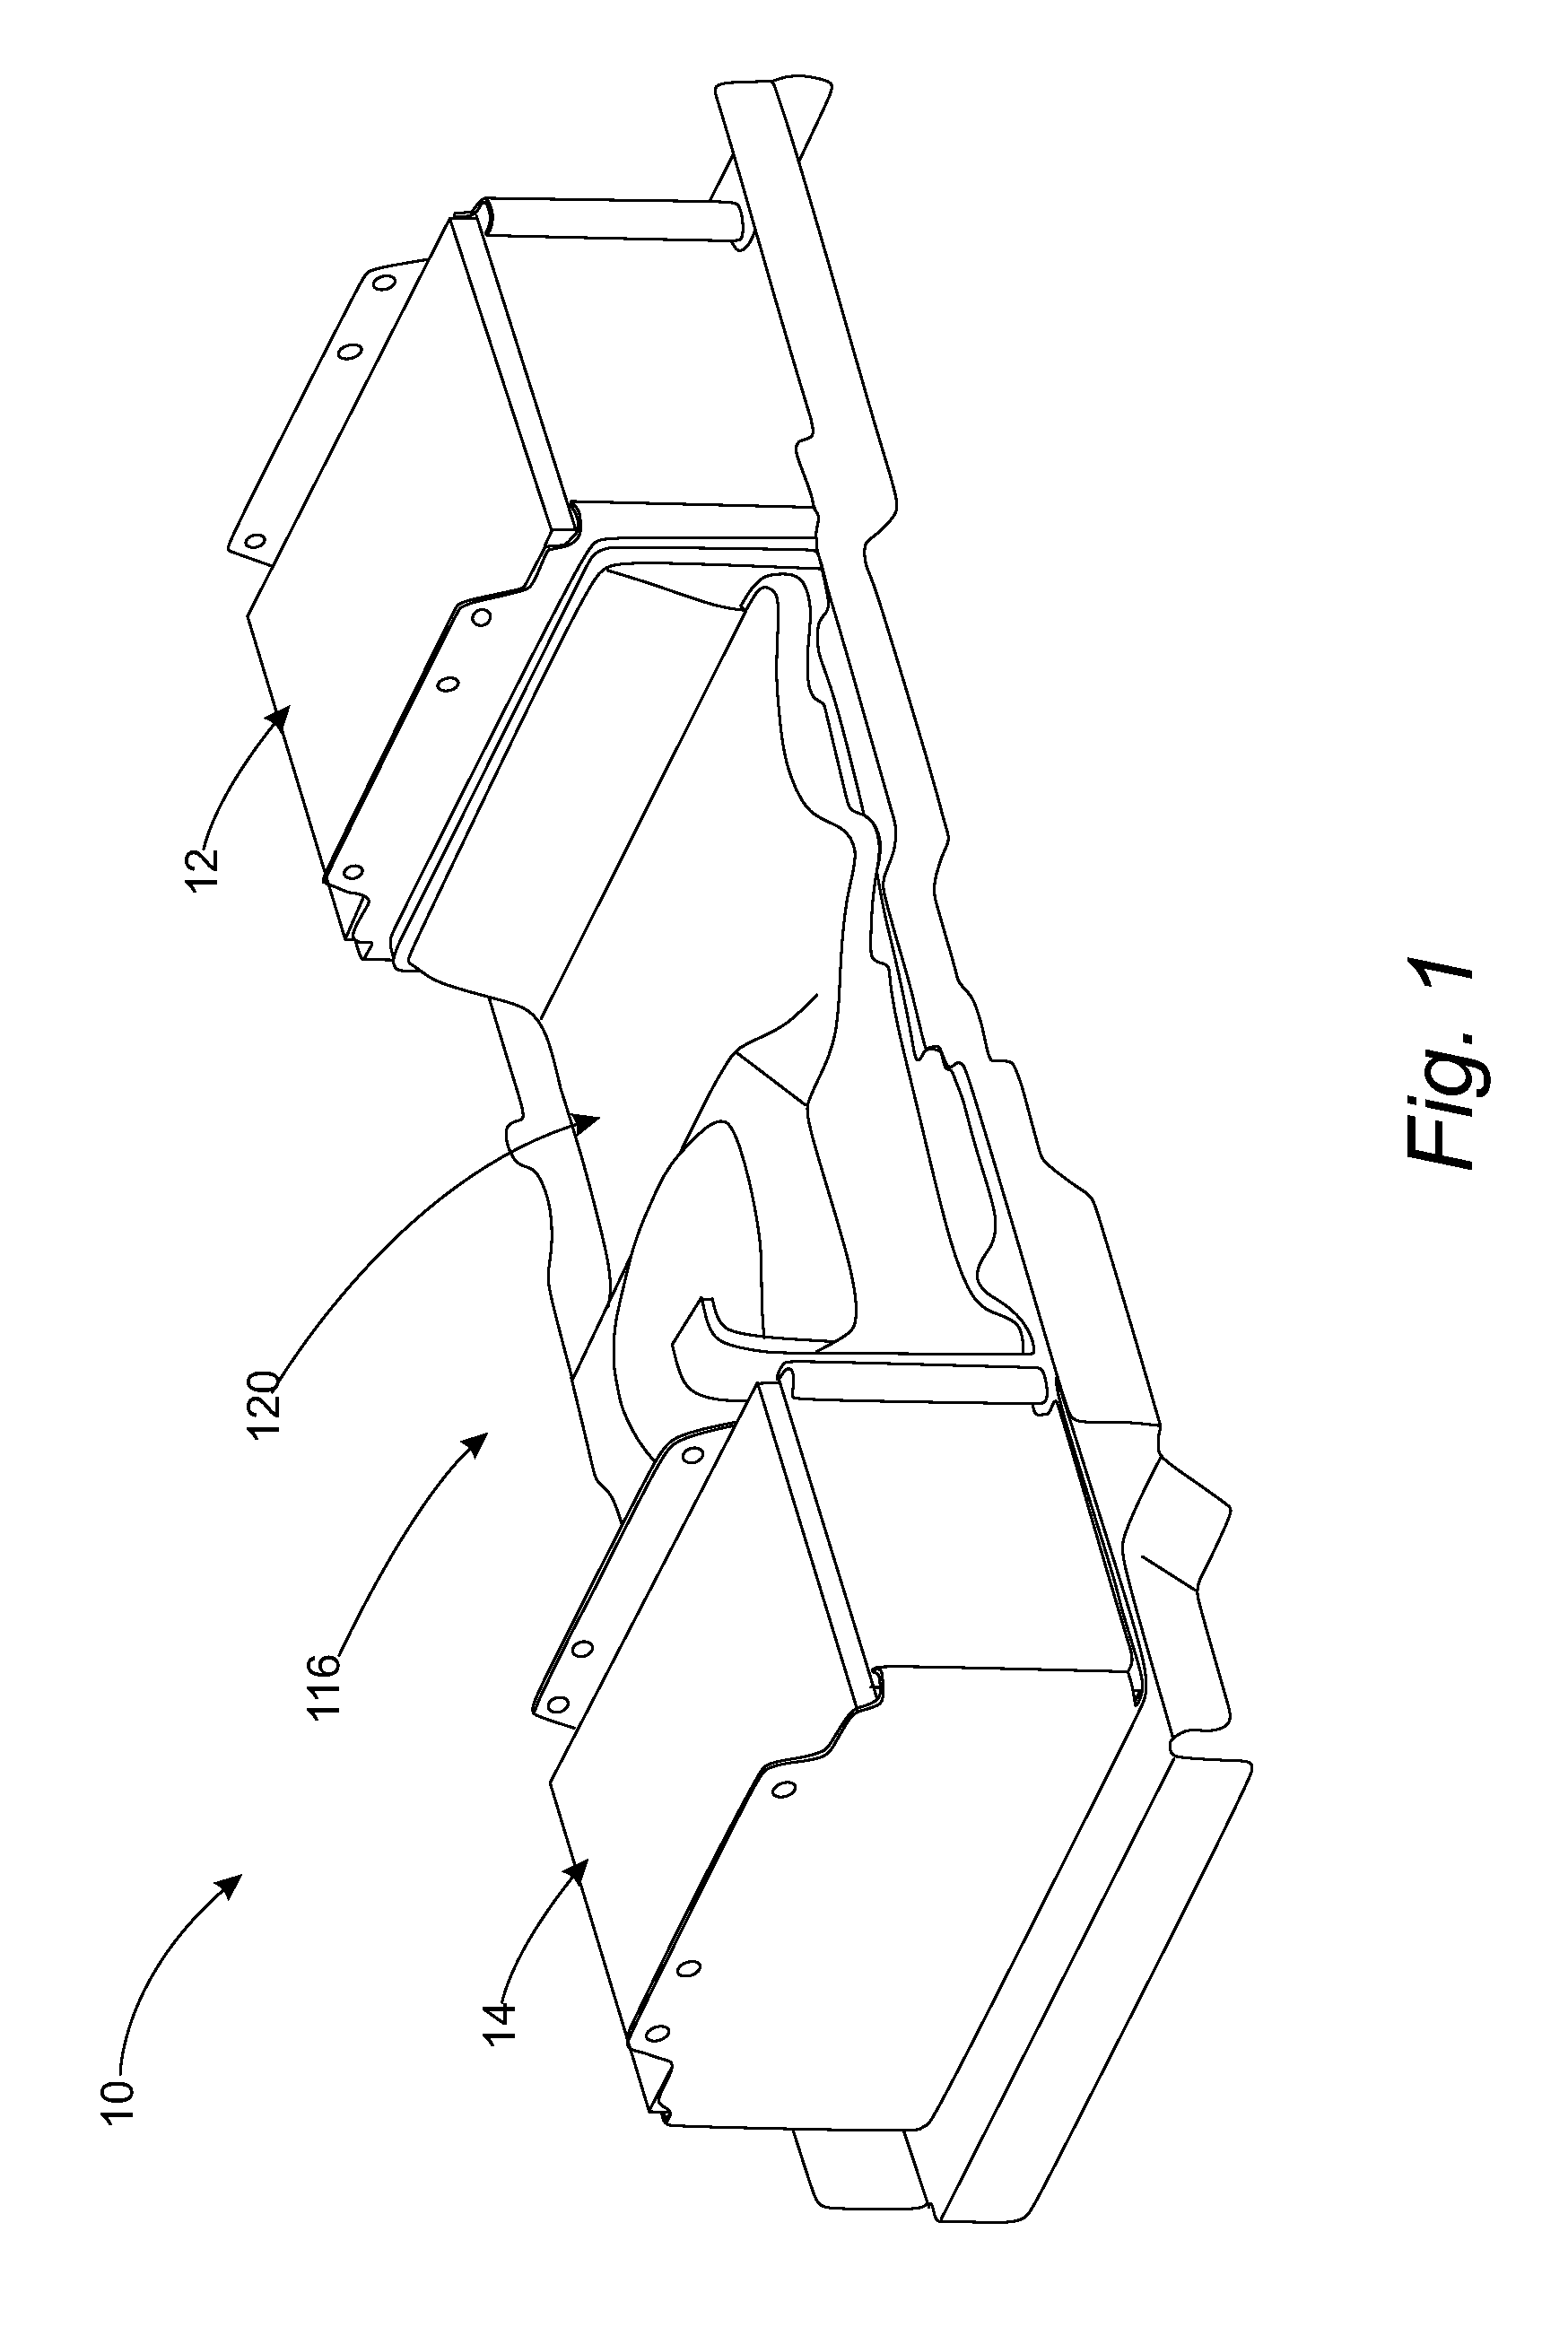 Integrated and Optimized Battery Cooling Blower and Manifold